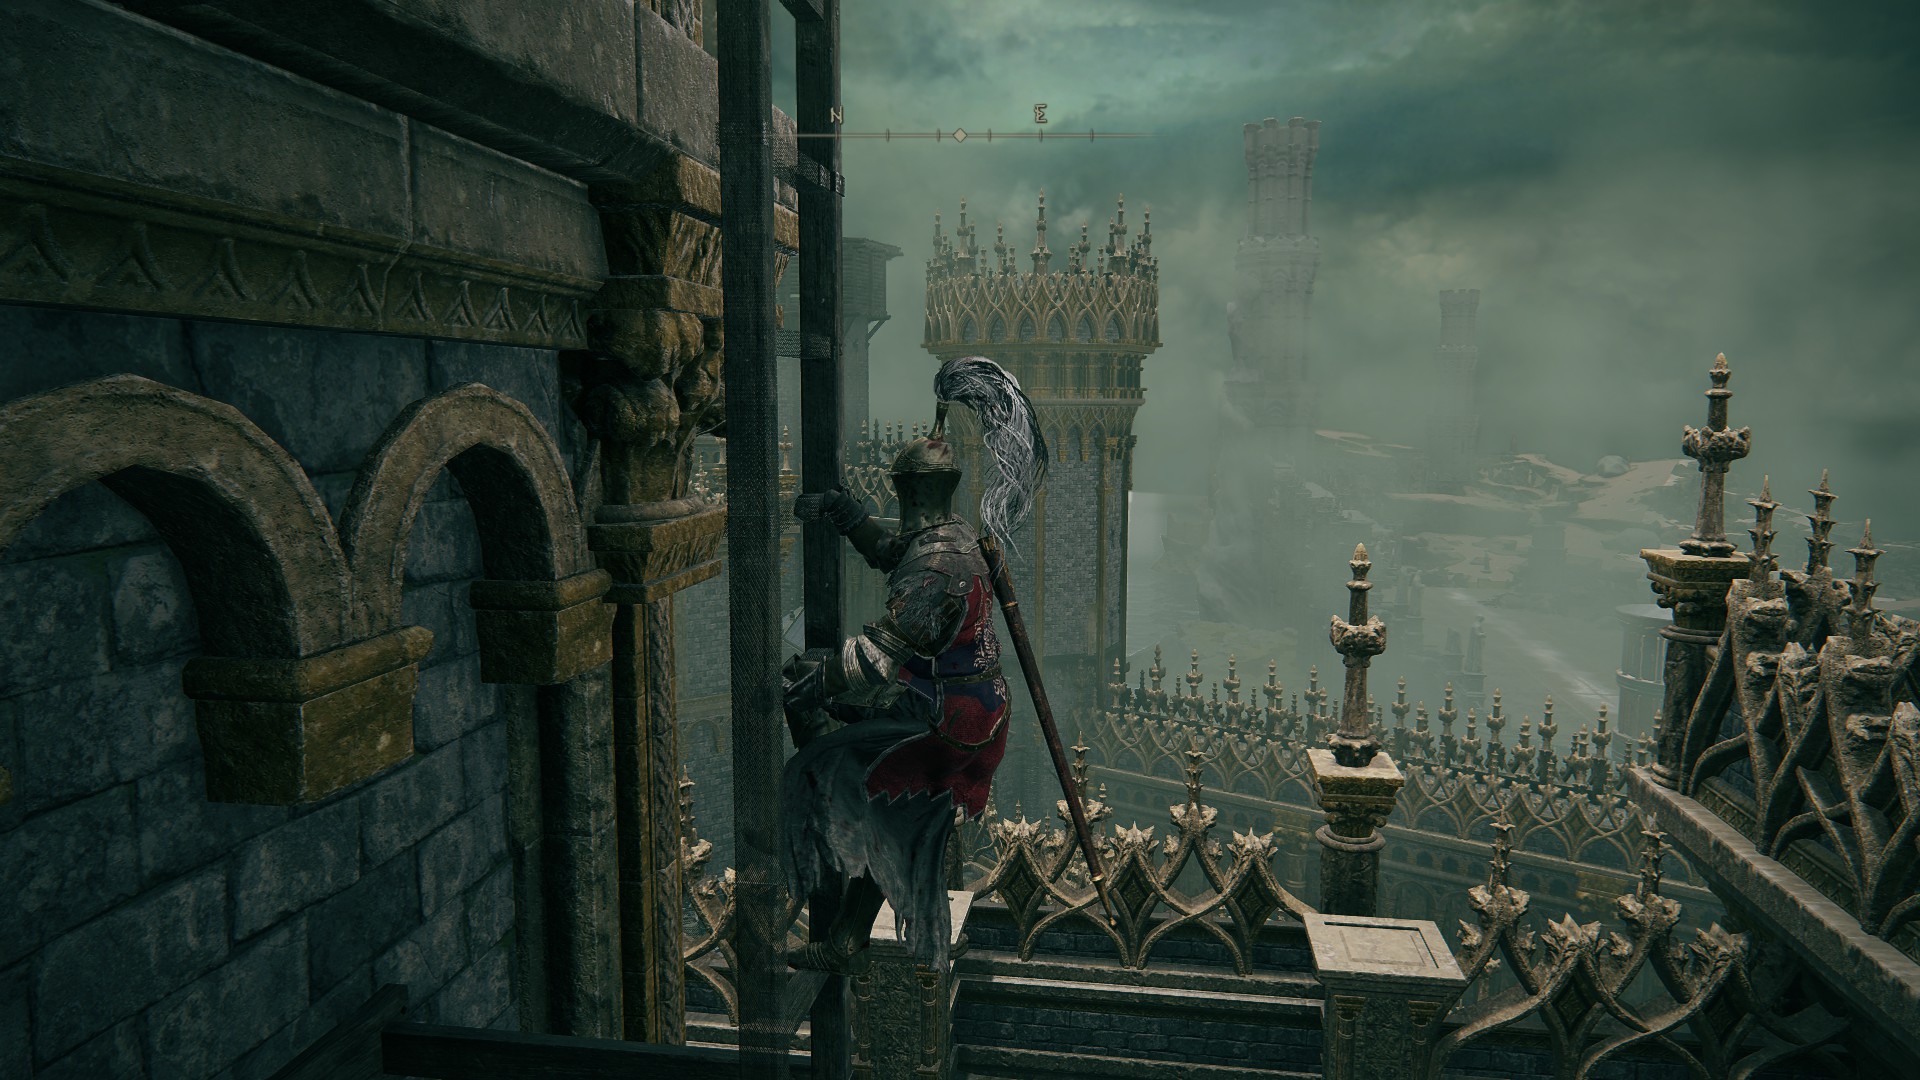 A knight climbs a ladder on the side of a tower. Ornate ramparts stretch off into the smoke.